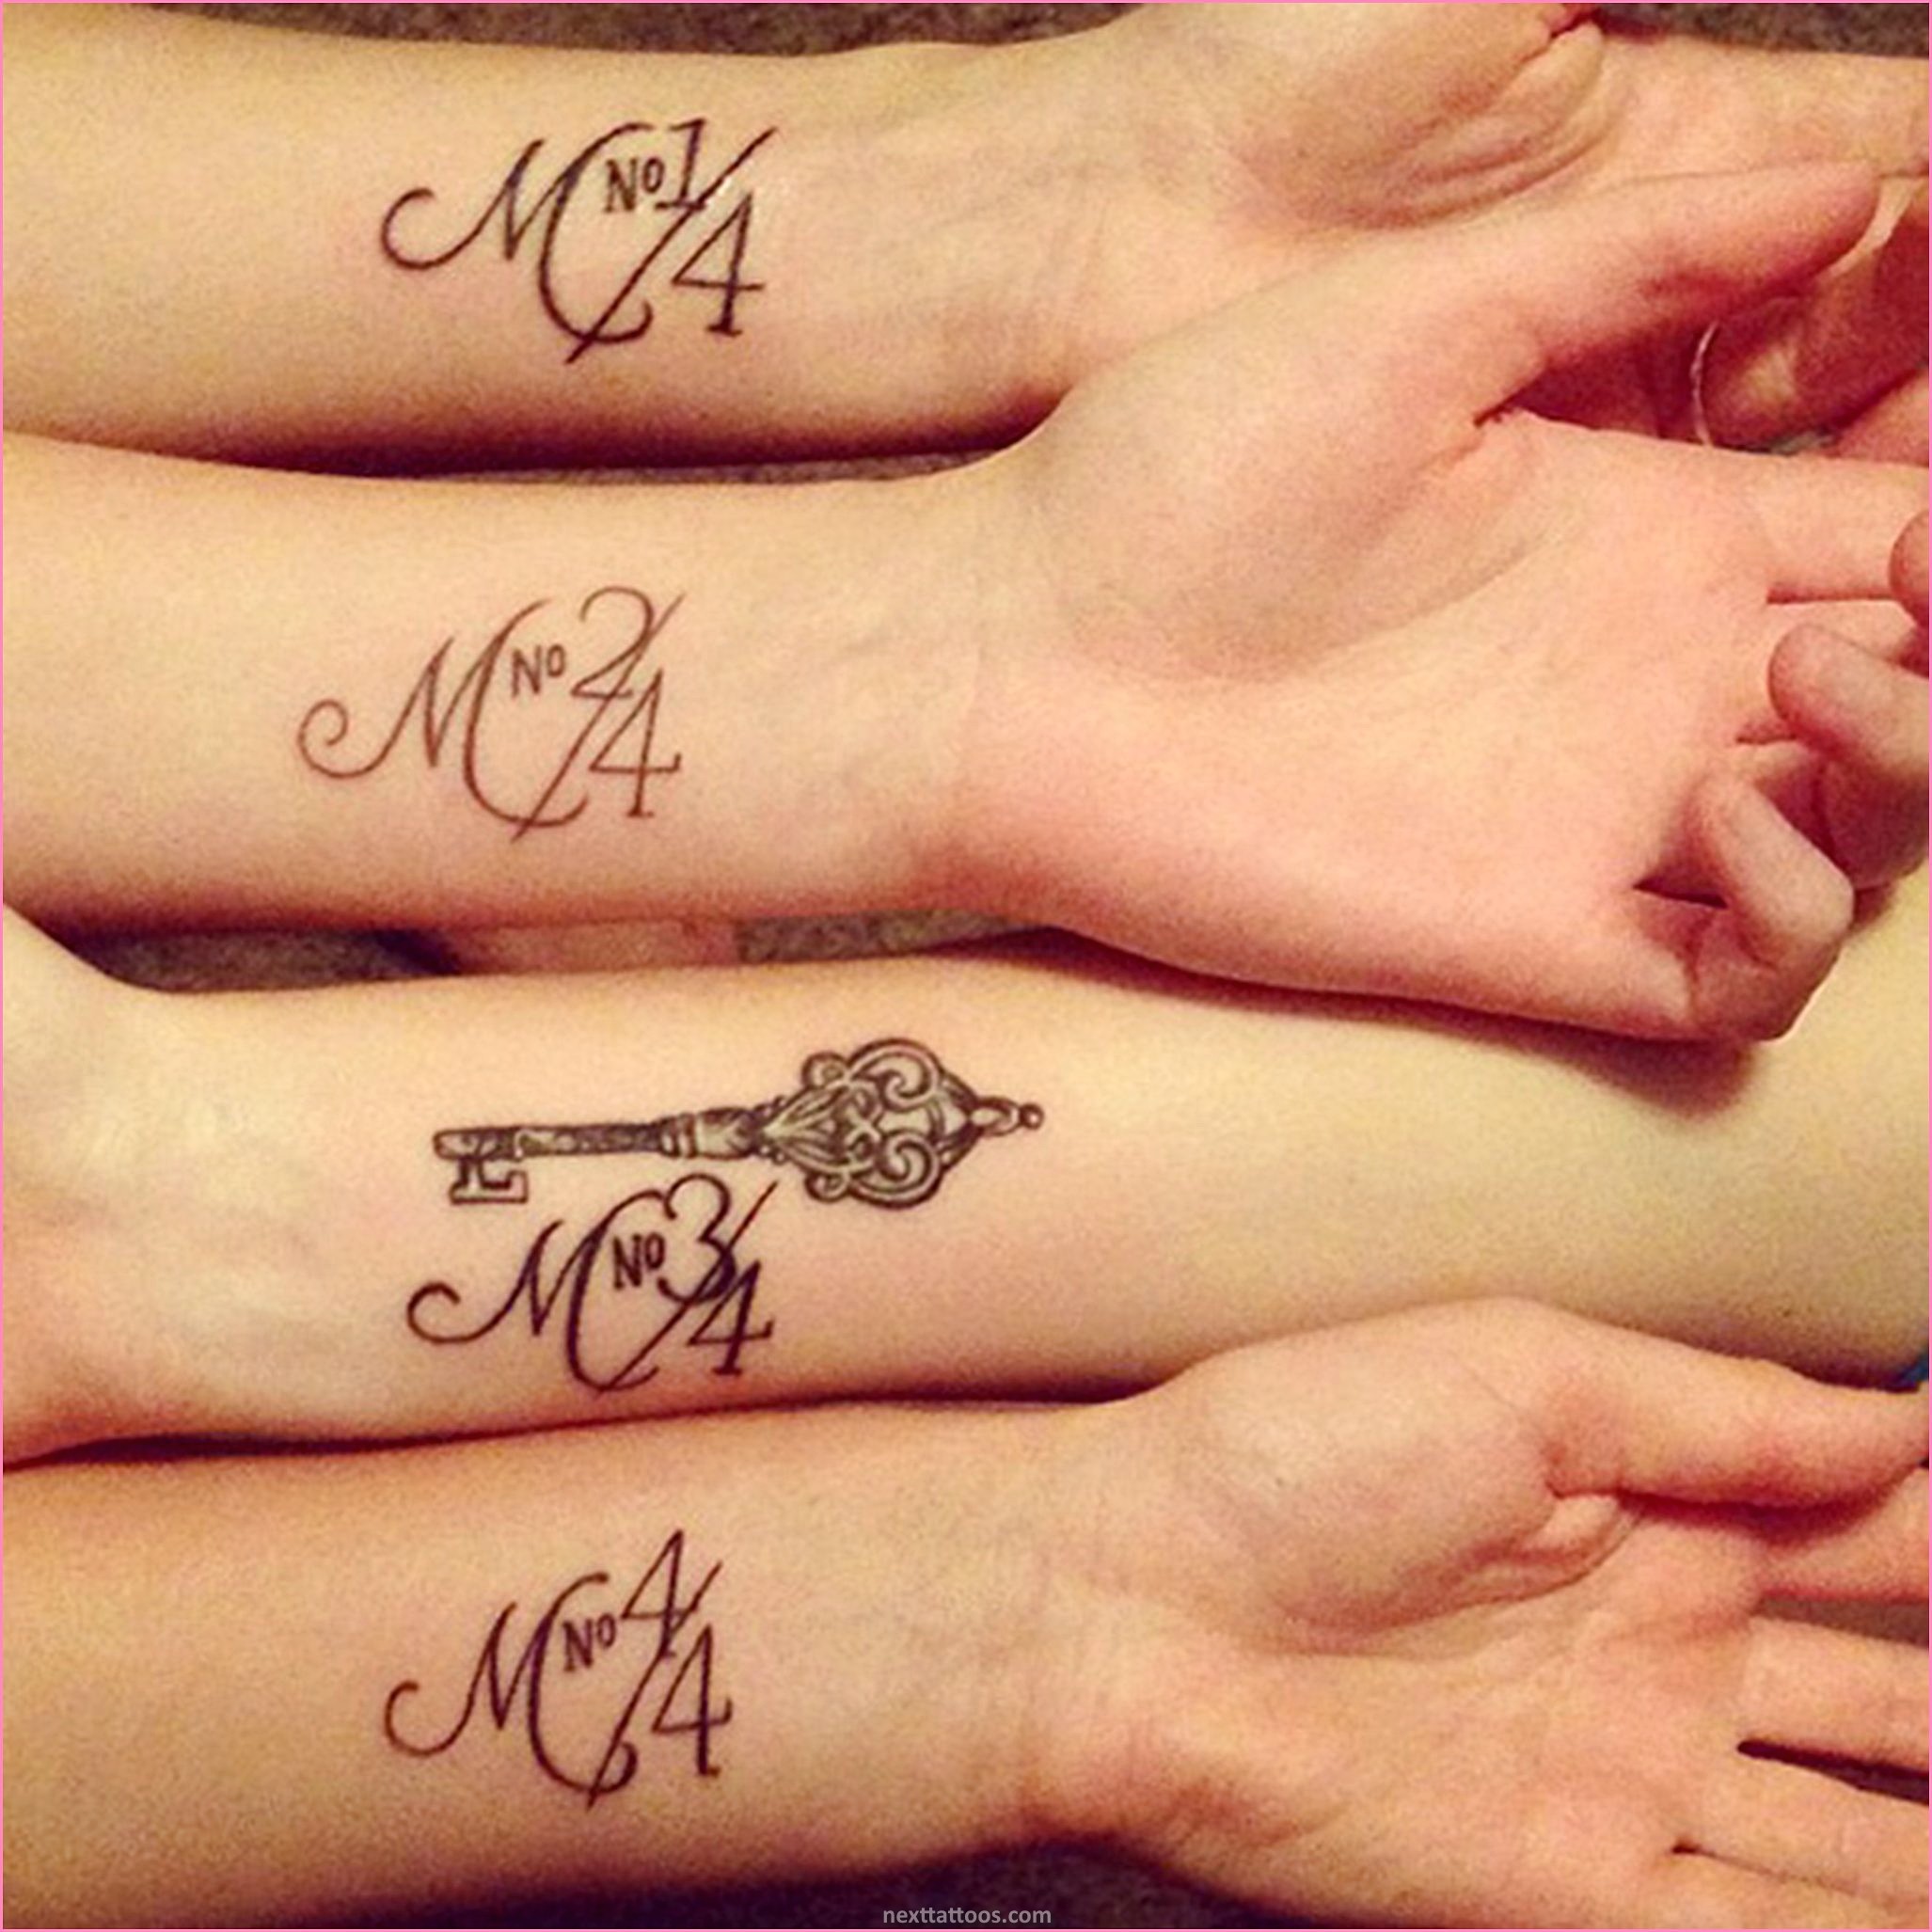 Sibling Tattoo Ideas - Inspire Your Siblings